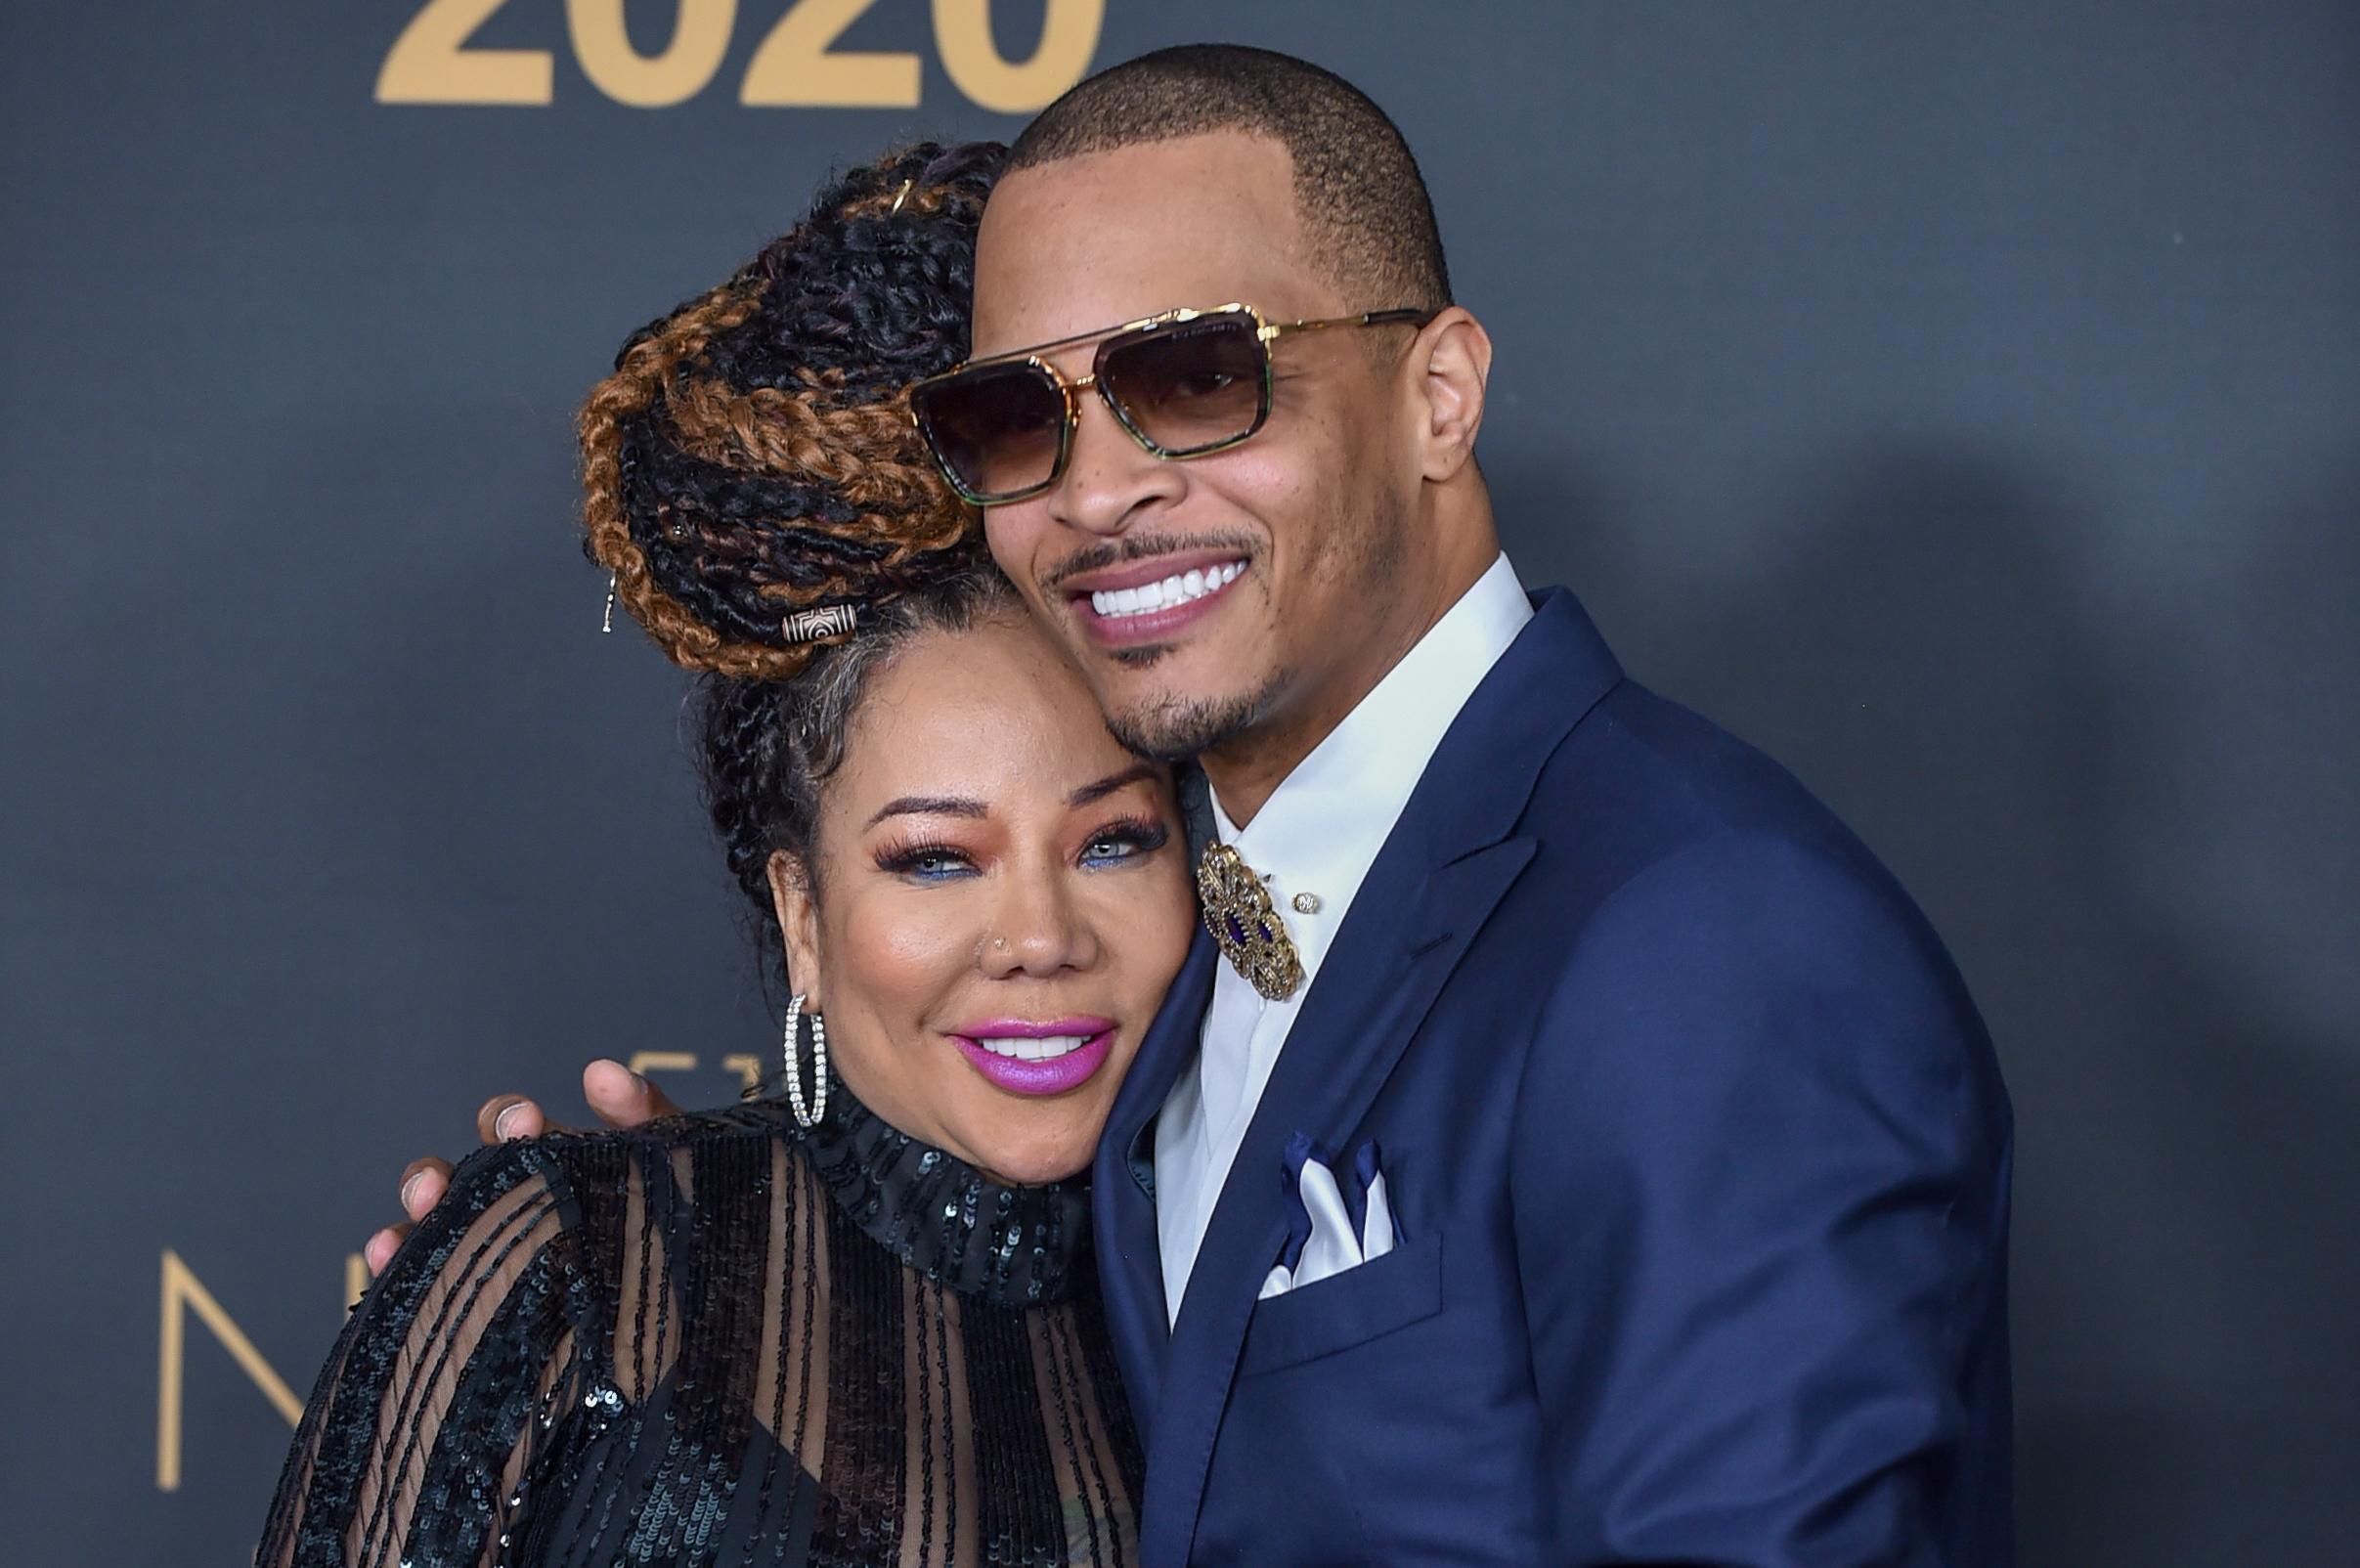 T.I. And Tiny Harris’ Daughter Zonnique Says Her 4-Year-Old Sister Wants Them To Have Another Baby